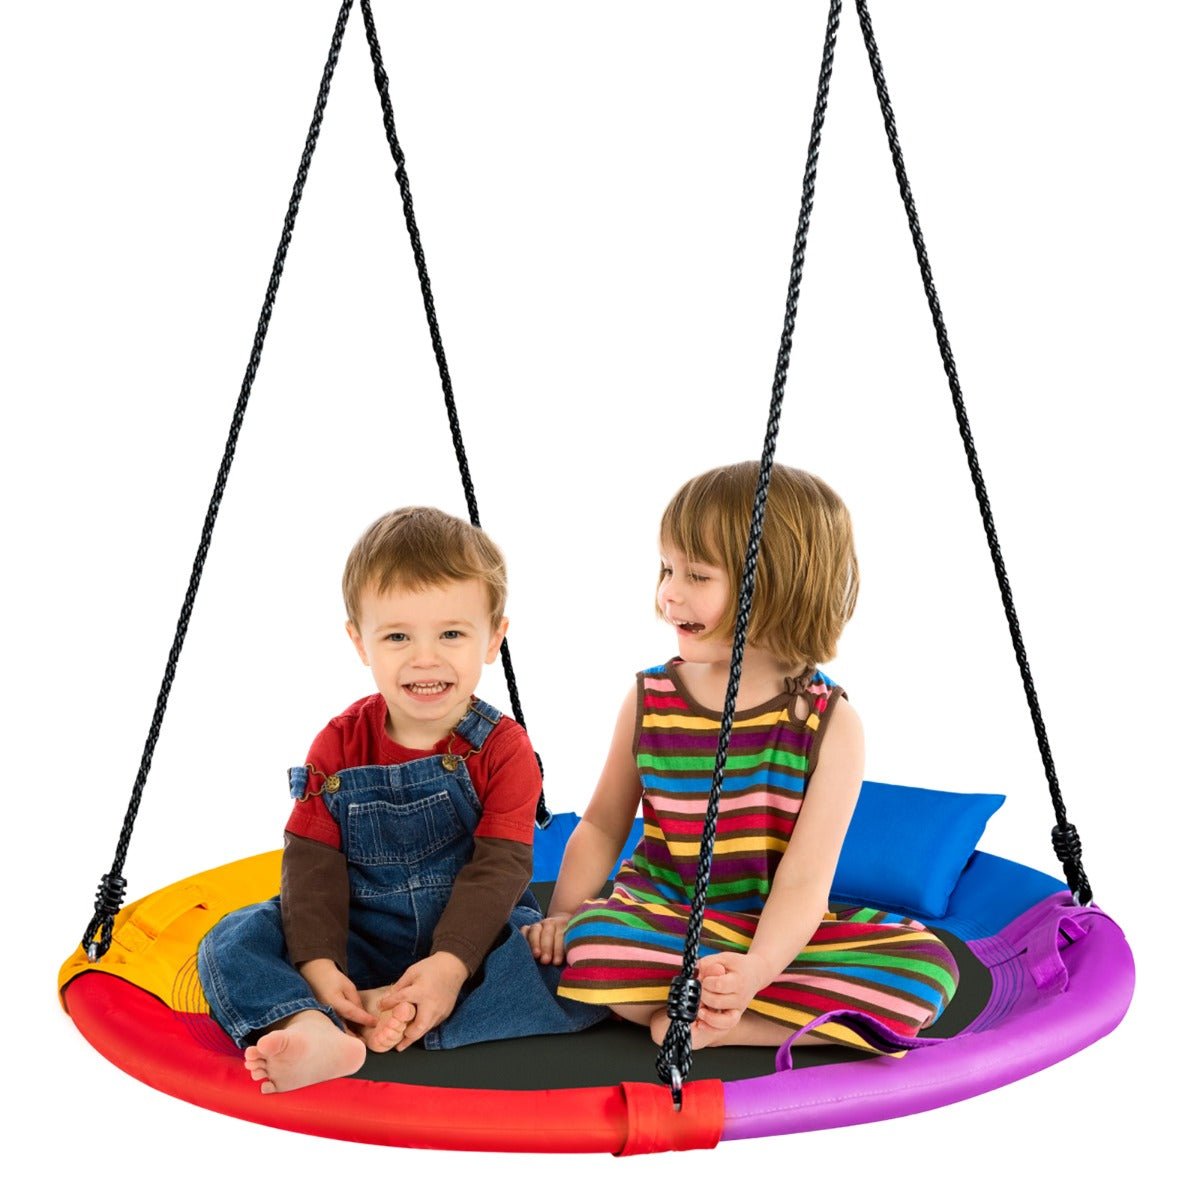 colourful Round Platform Swing: Outdoor Joy for Kids with Pillow